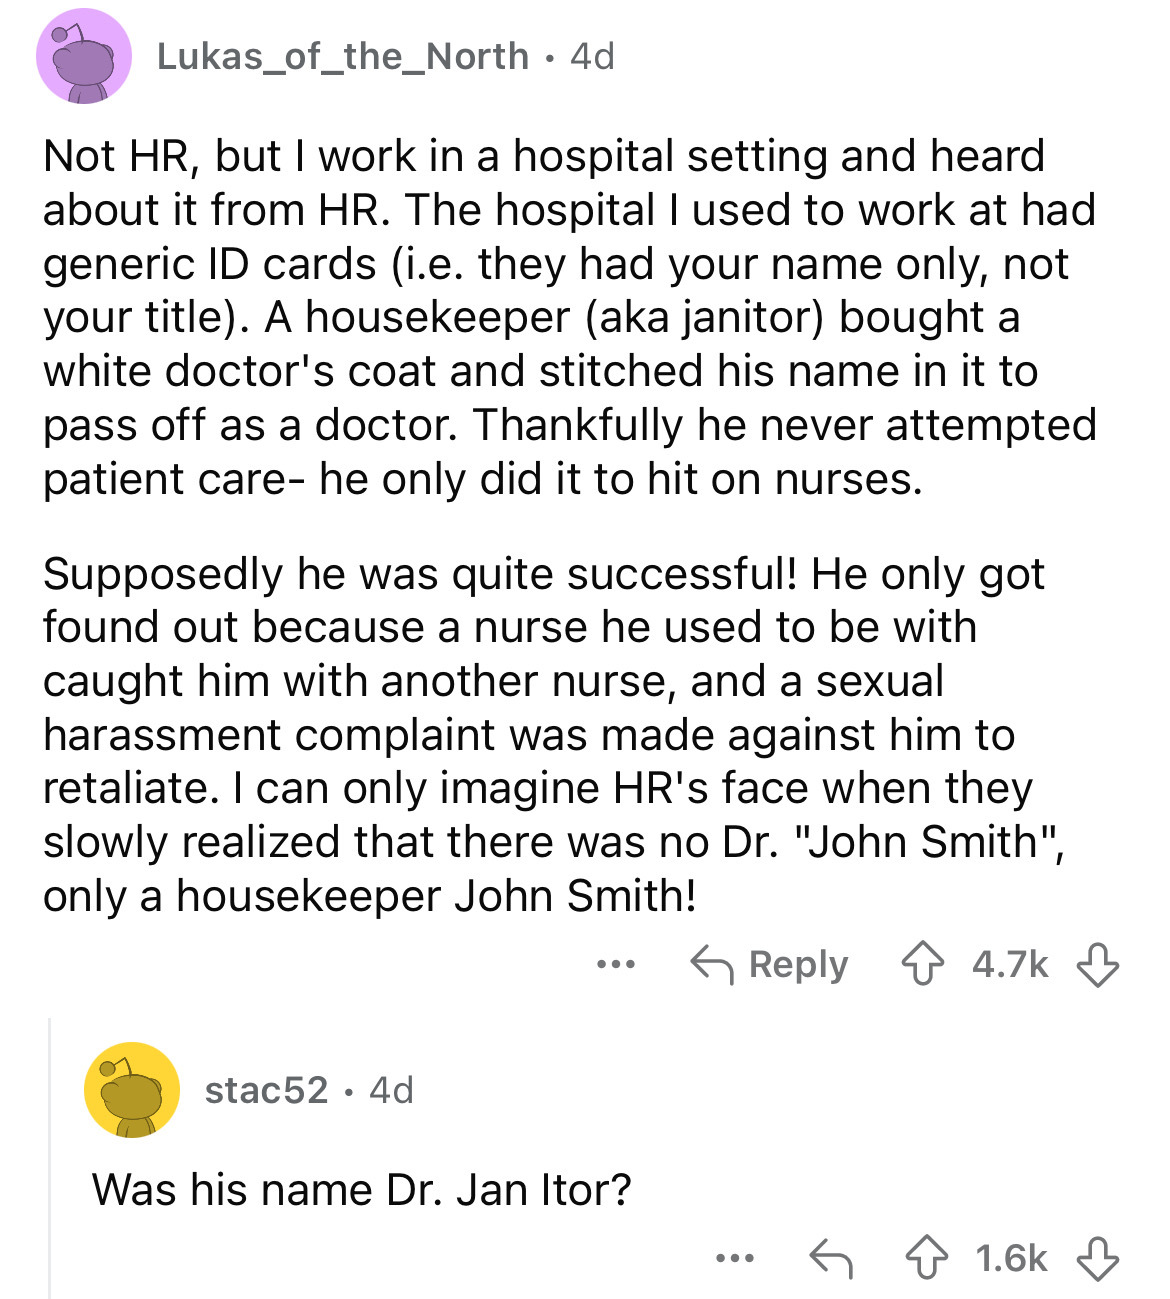 document - . Lukas_of_the_North 4d Not Hr, but I work in a hospital setting and heard about it from Hr. The hospital I used to work at had generic Id cards i.e. they had your name only, not your title. A housekeeper aka janitor bought a white doctor's coa